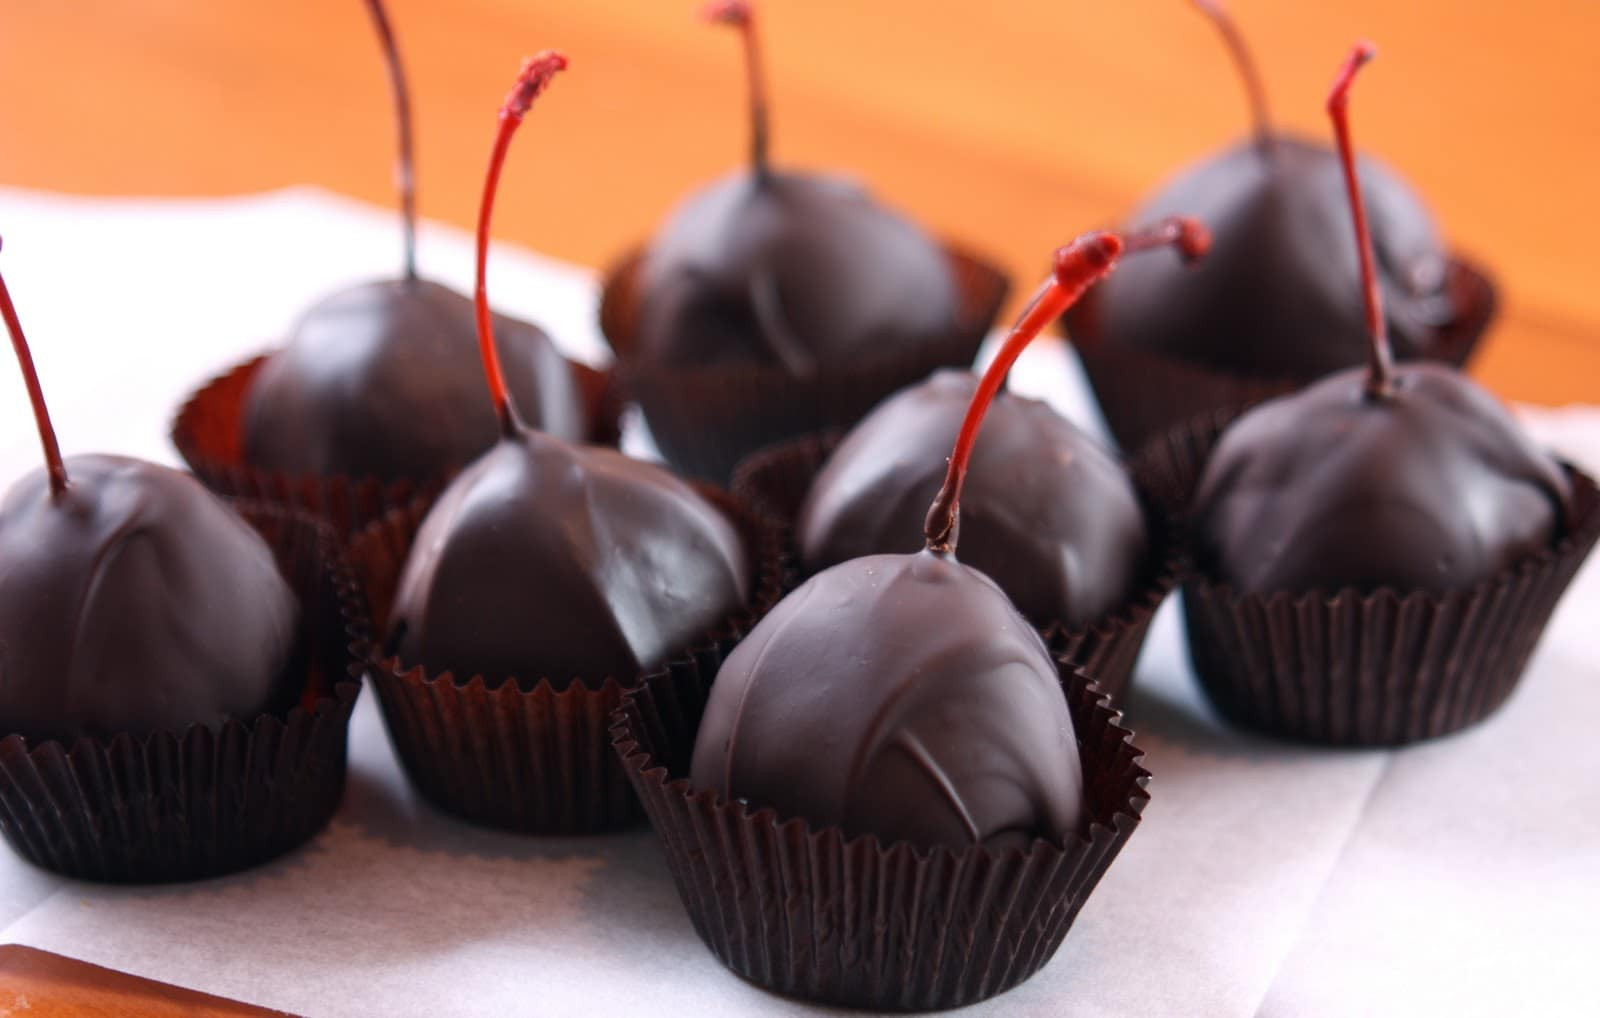 Chocolate Covered Cherry Recipes
 Queen Meg s Chocolate Covered Cherries Speedbump Kitchen